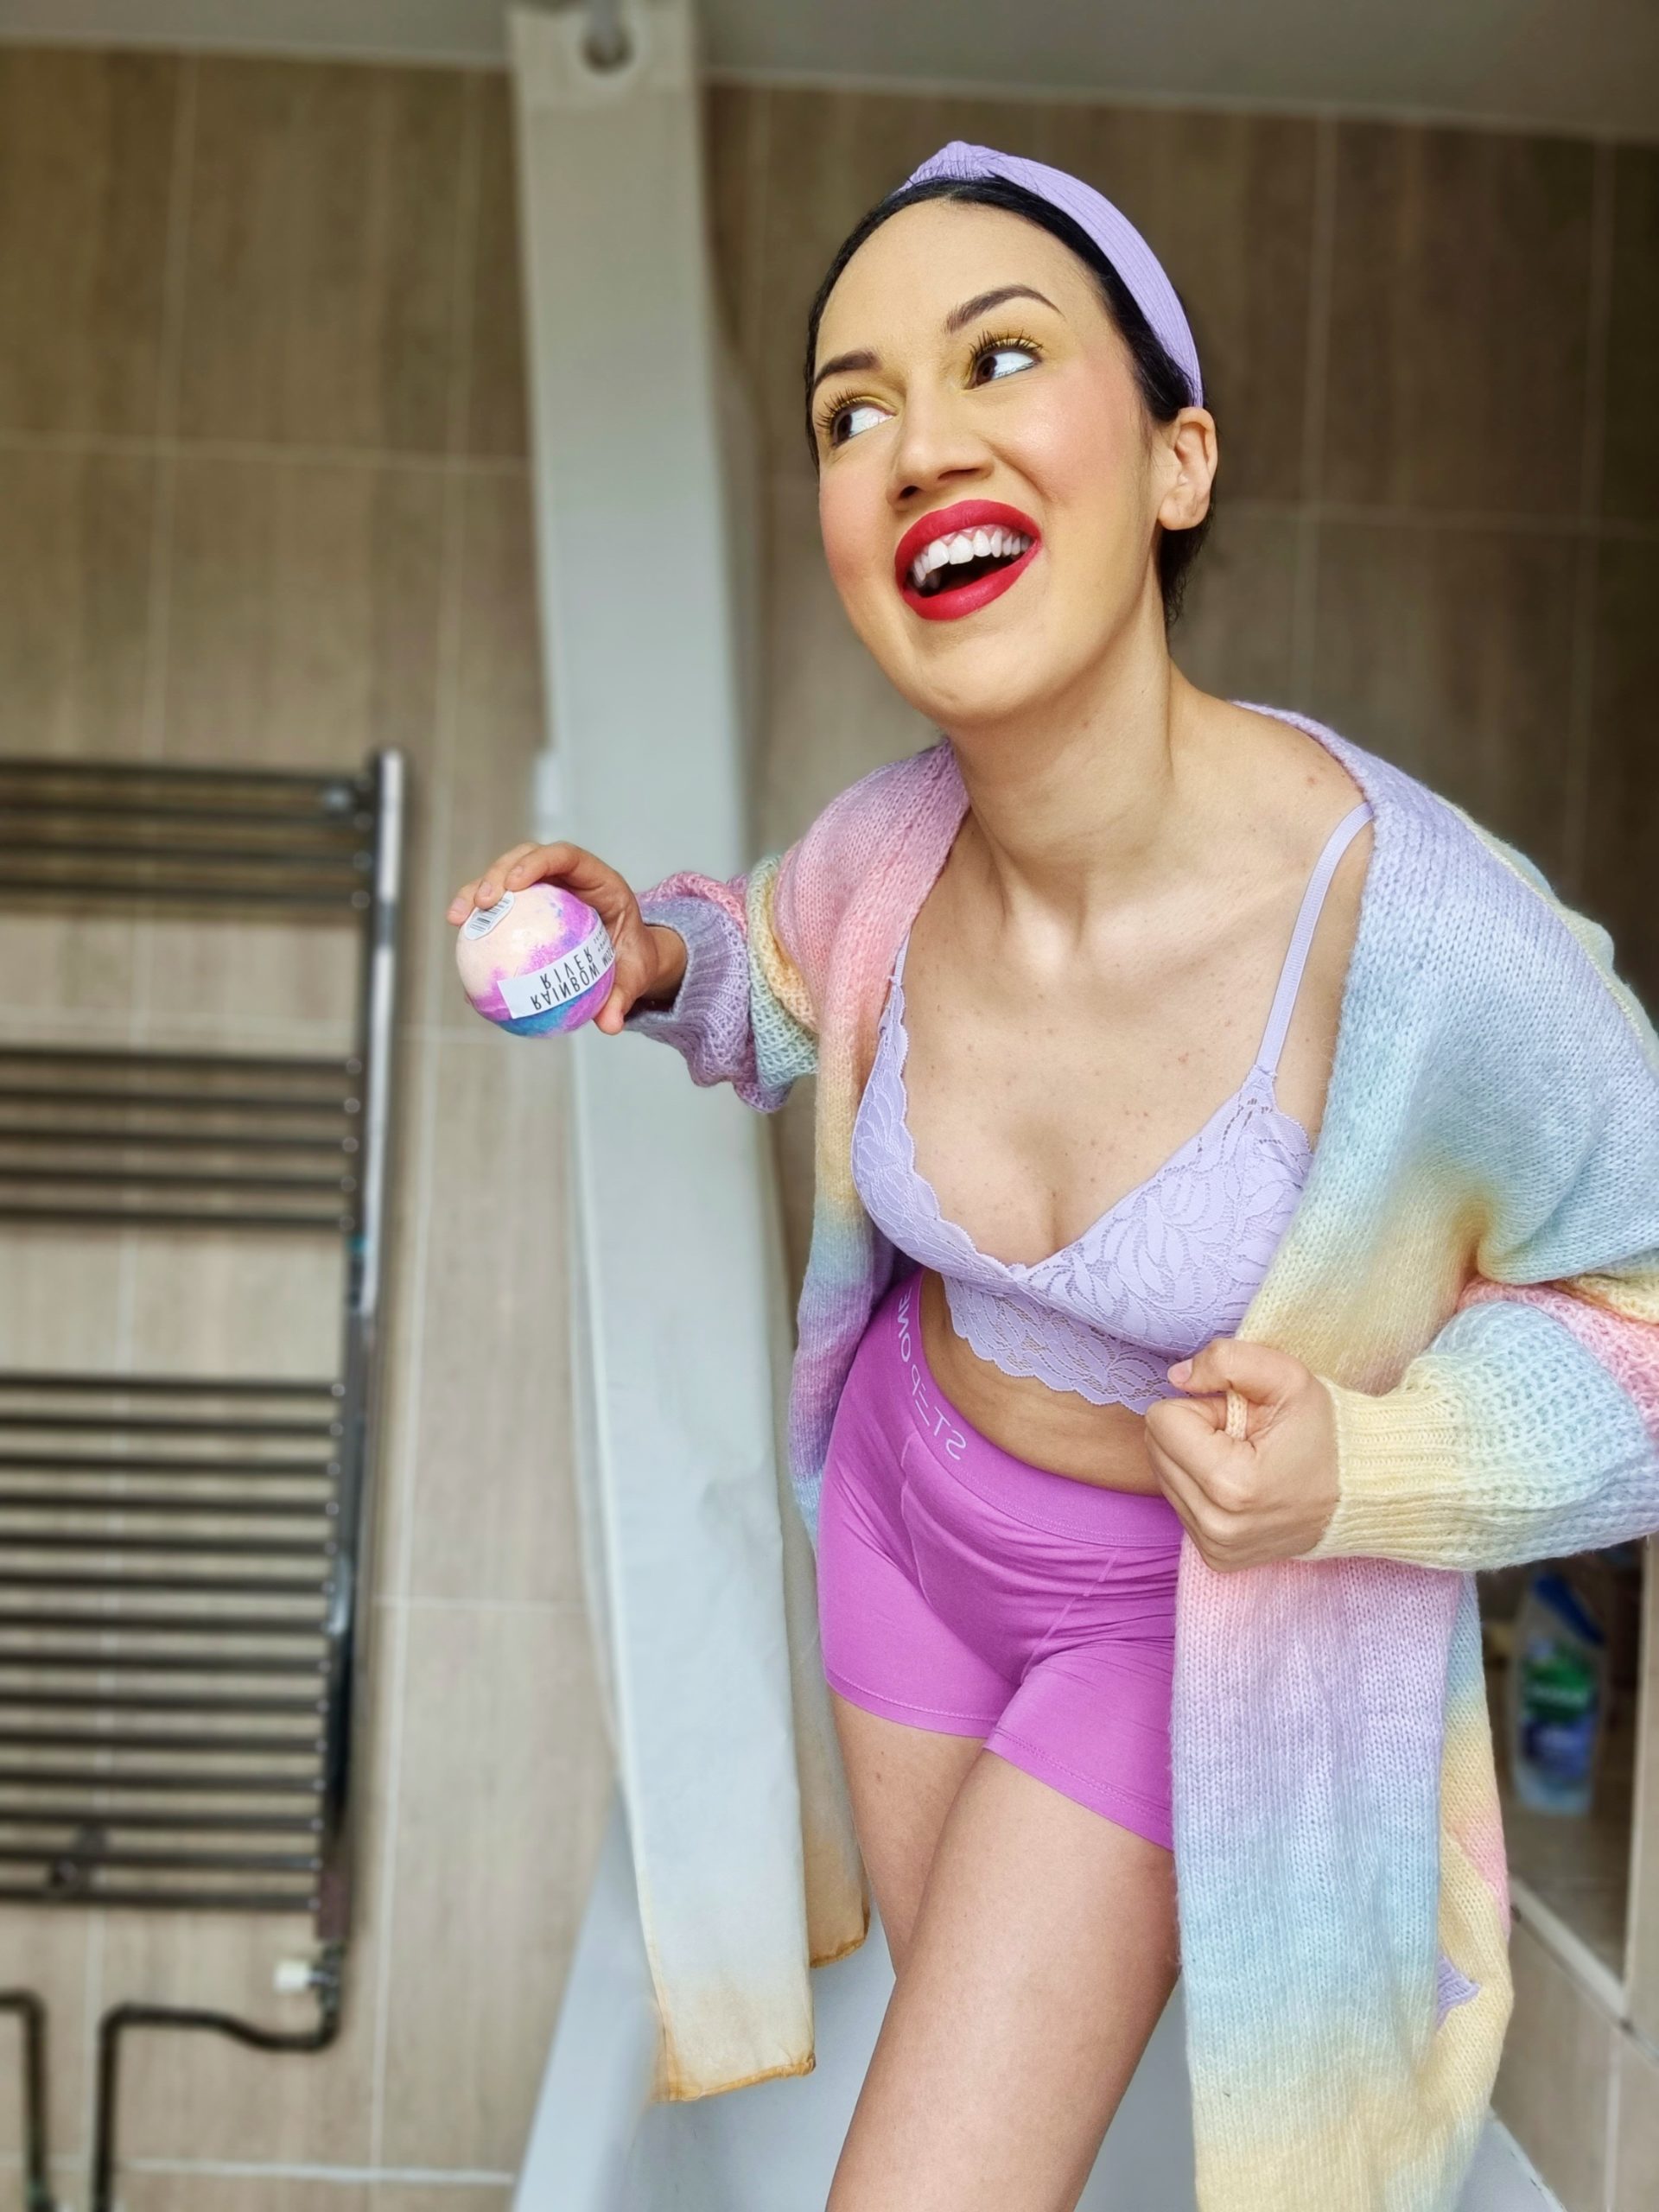 <img src="ana.jpg" alt="ana with ombre cardigan and colourful underwear "> 